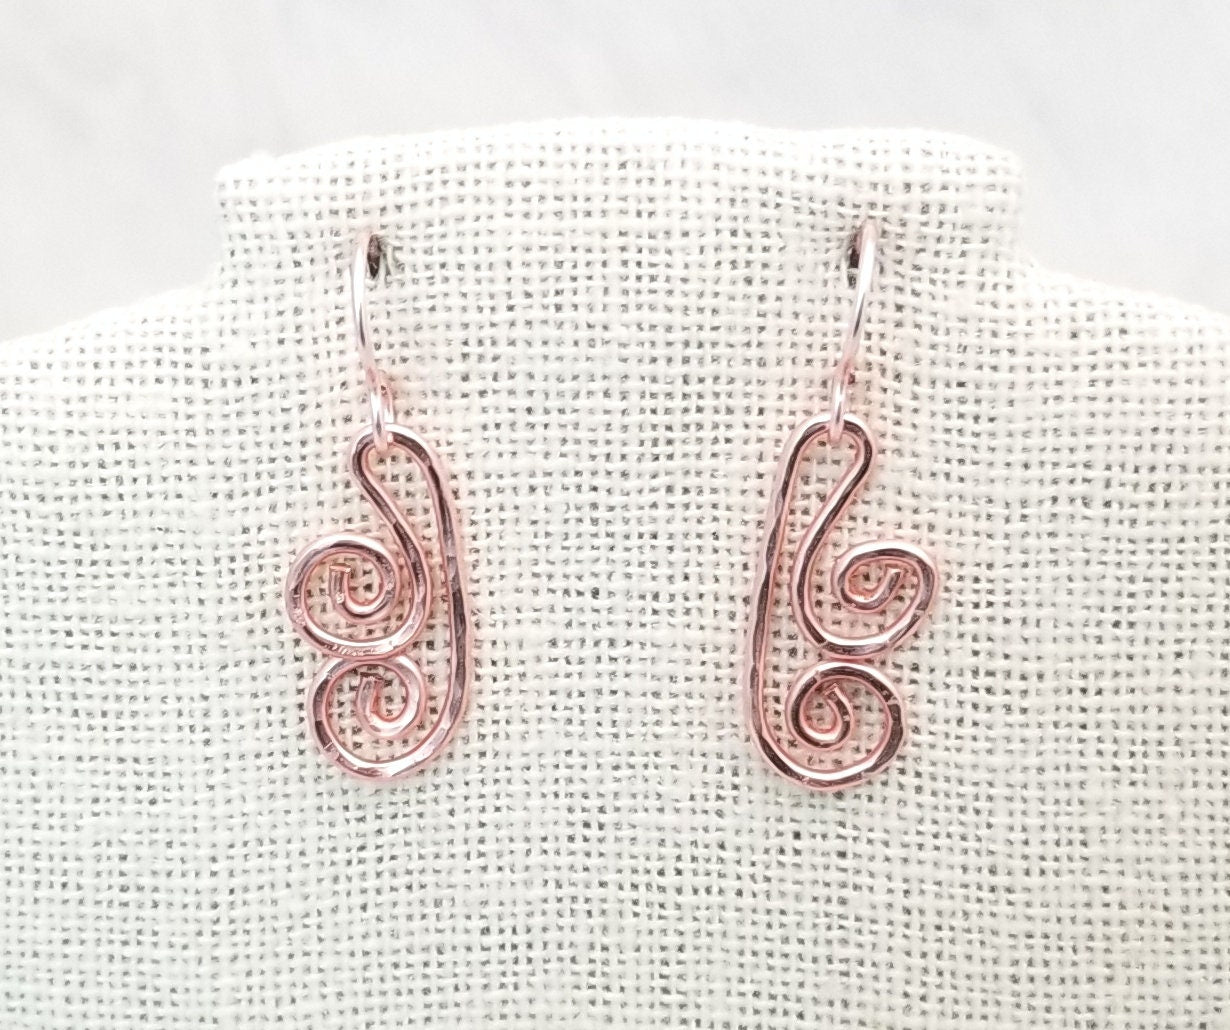 Hammered Spiral Wire Earrings, Short, Art Deco, Modern, Simple, Wedding, Bridesmaid, Choice of Metals and Closure Types